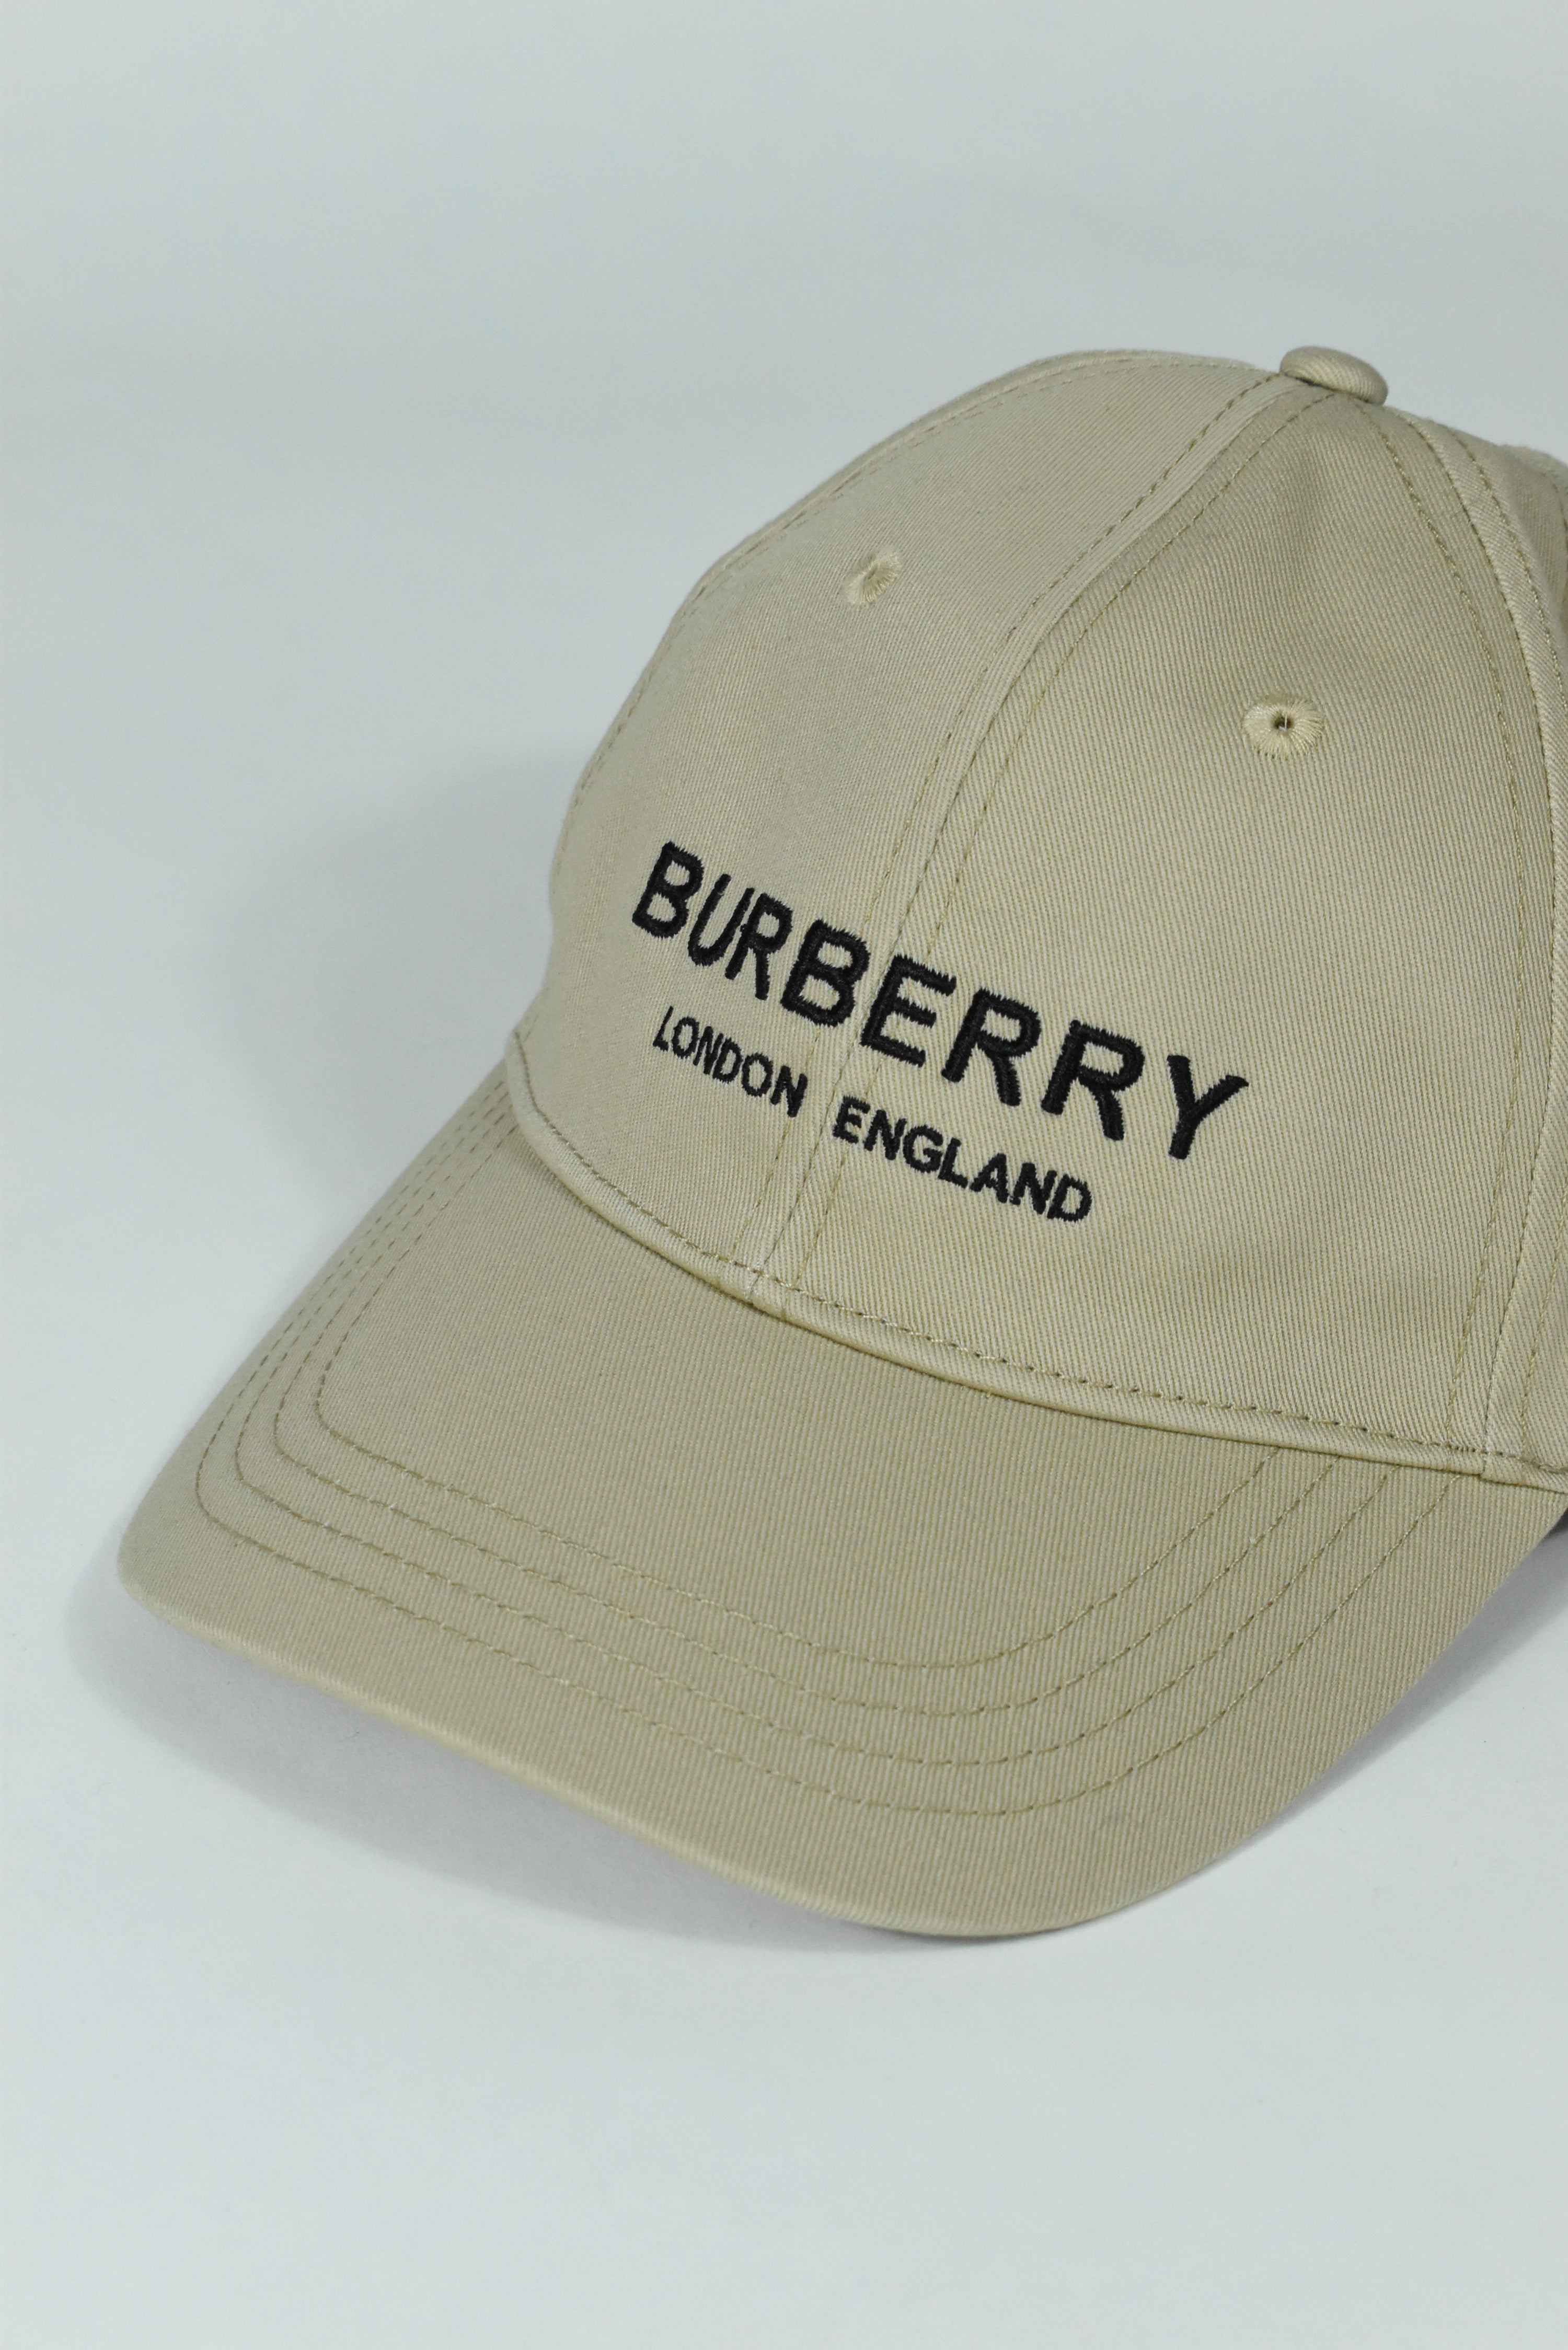 New Beige Burberry London Embroidery Cap